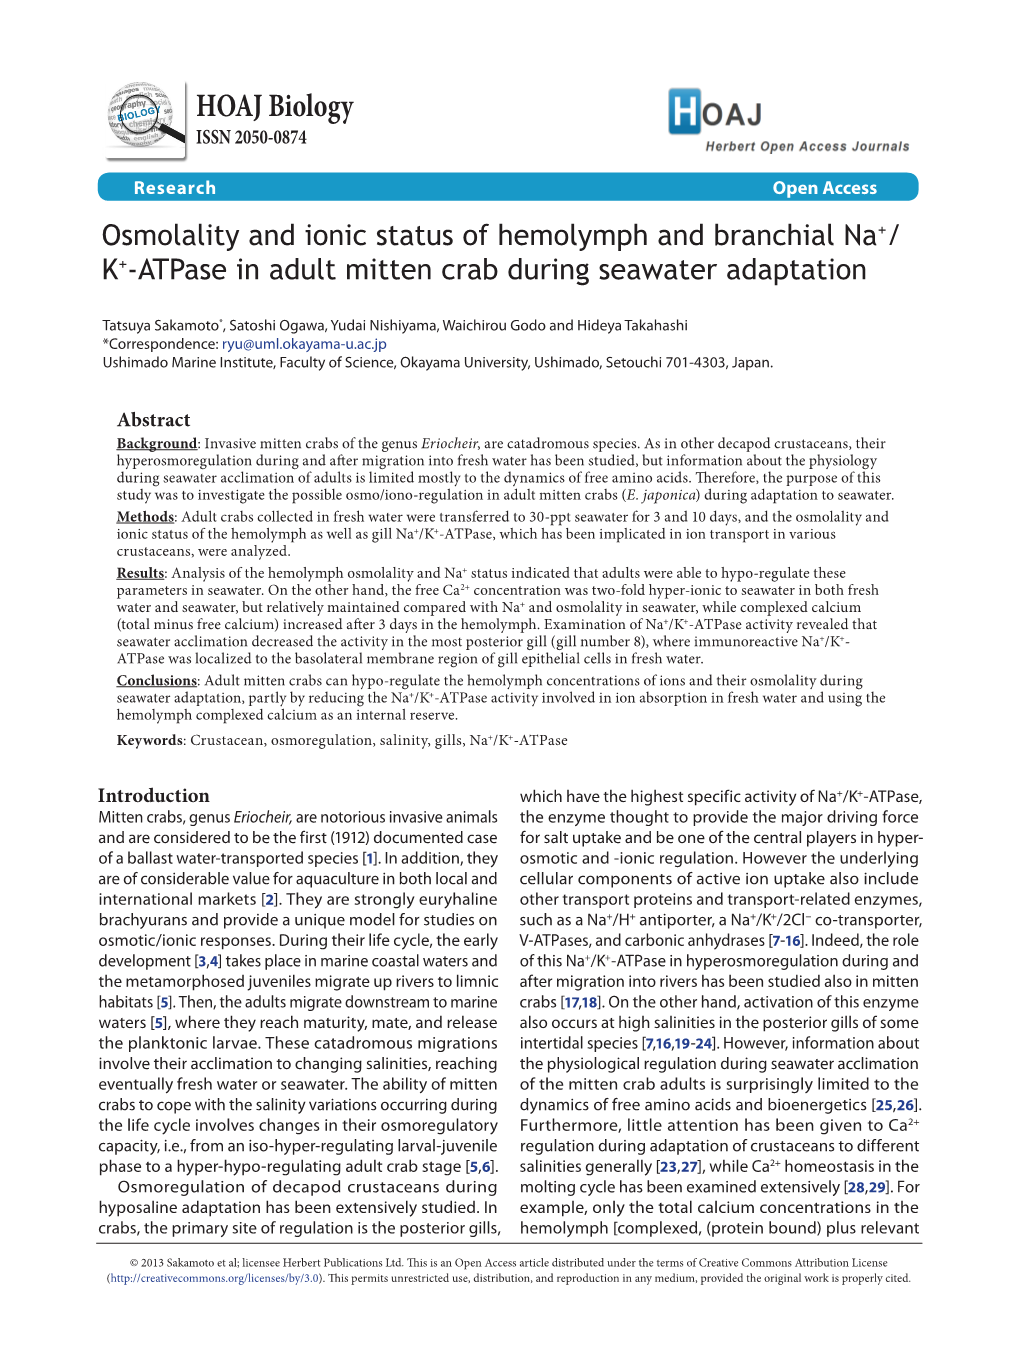 Osmolality and Ionic Status of Hemolymph and Branchial Na+/K+